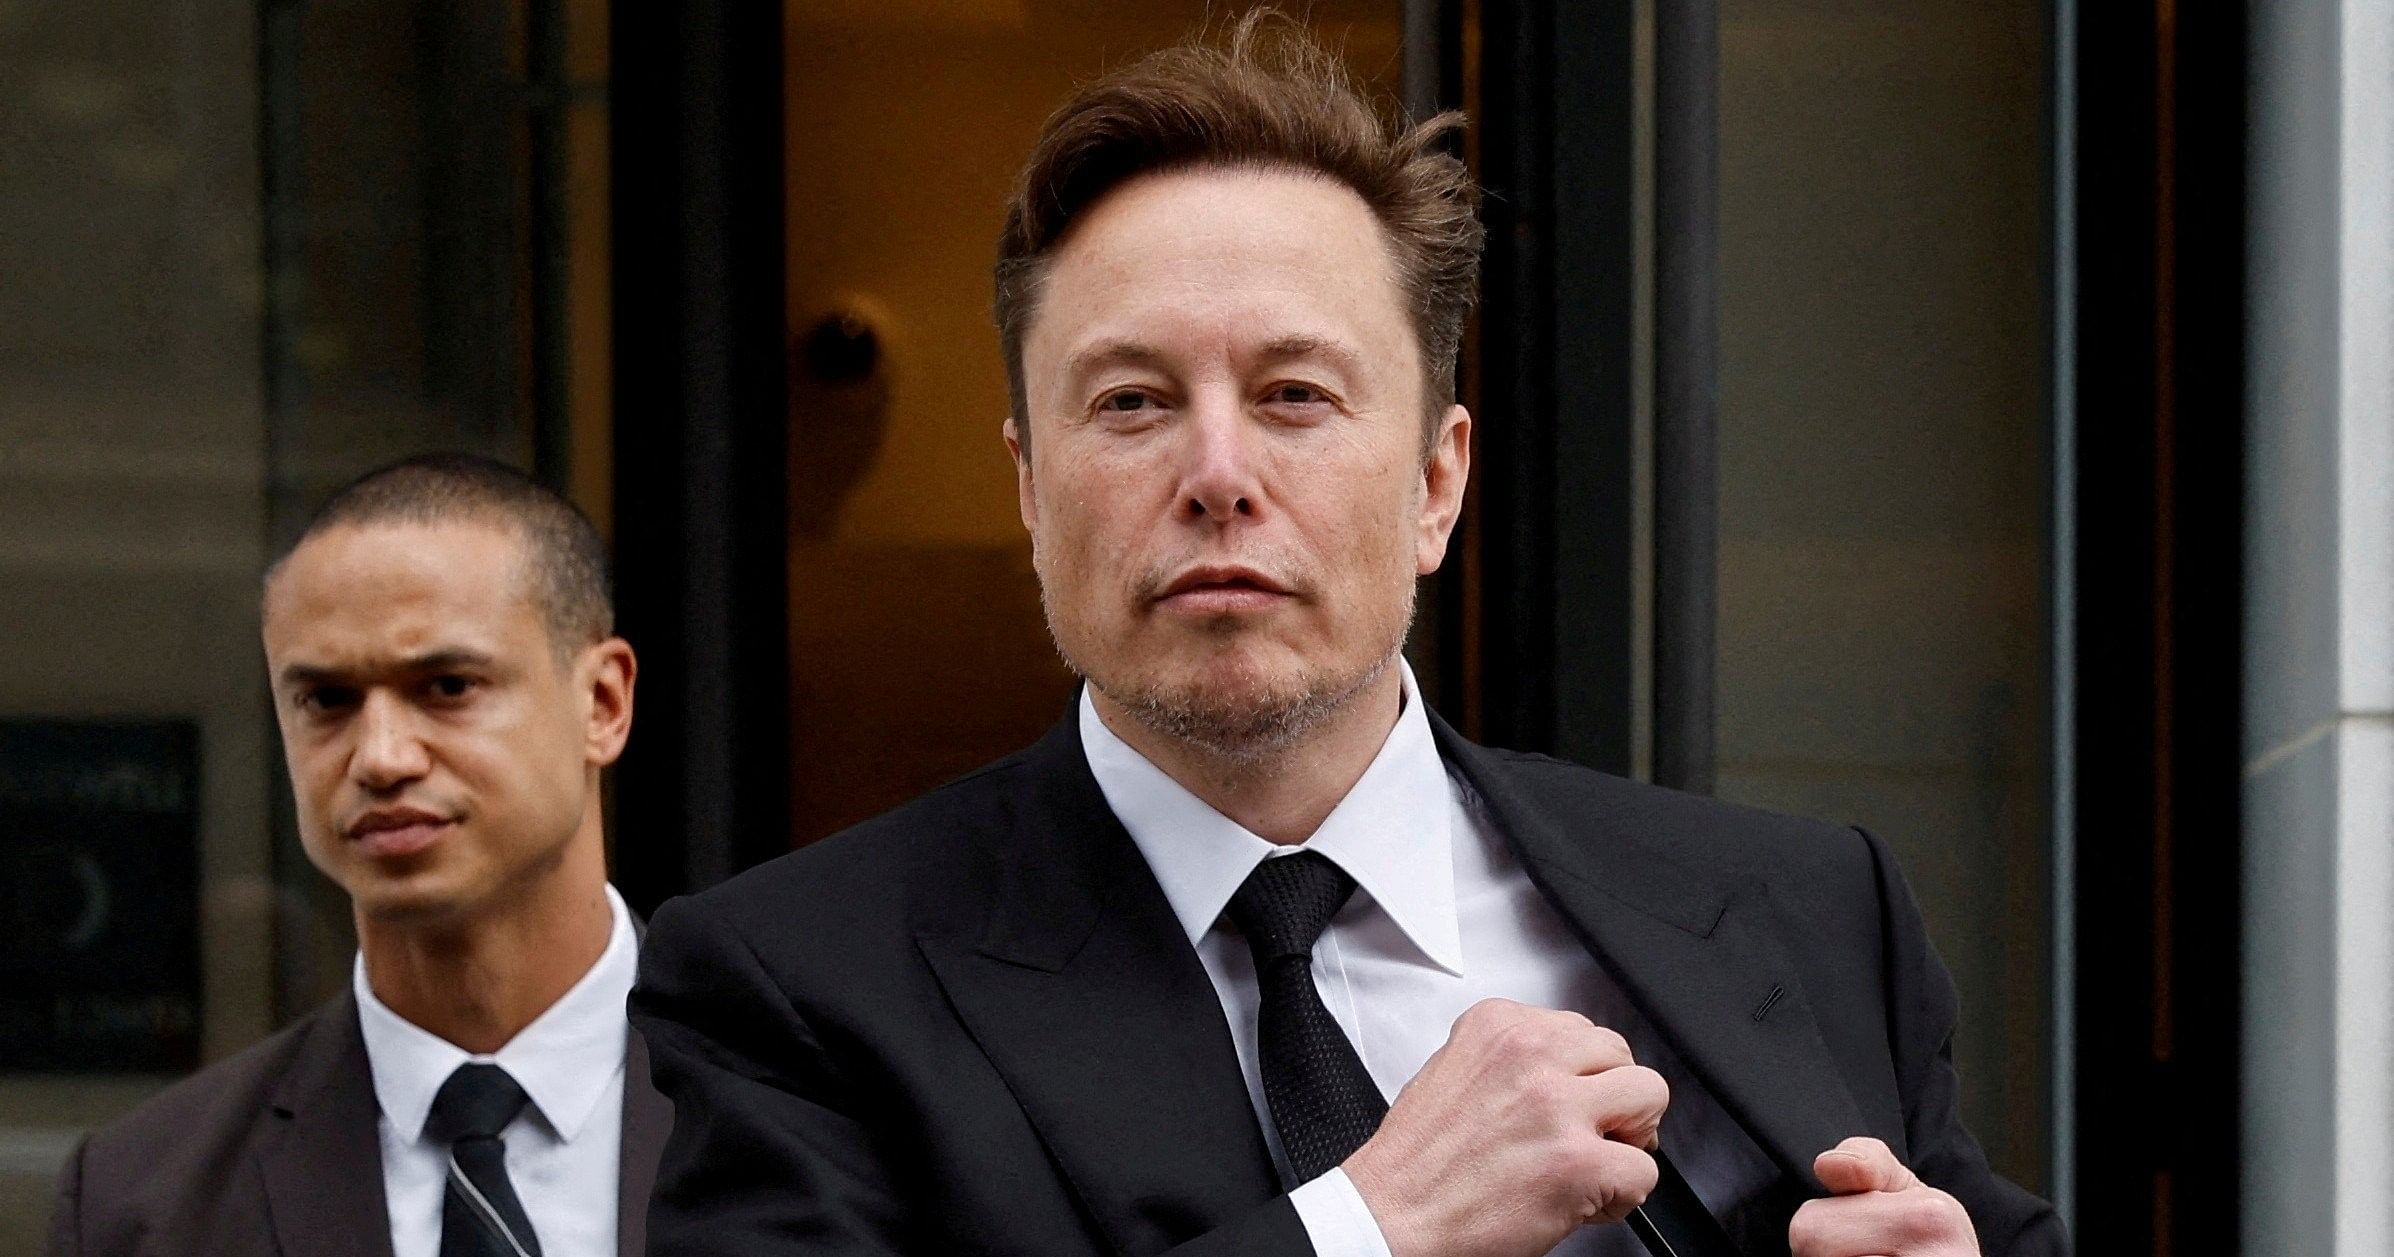 Musk loses autonomy in race for Tesla Robotaxis